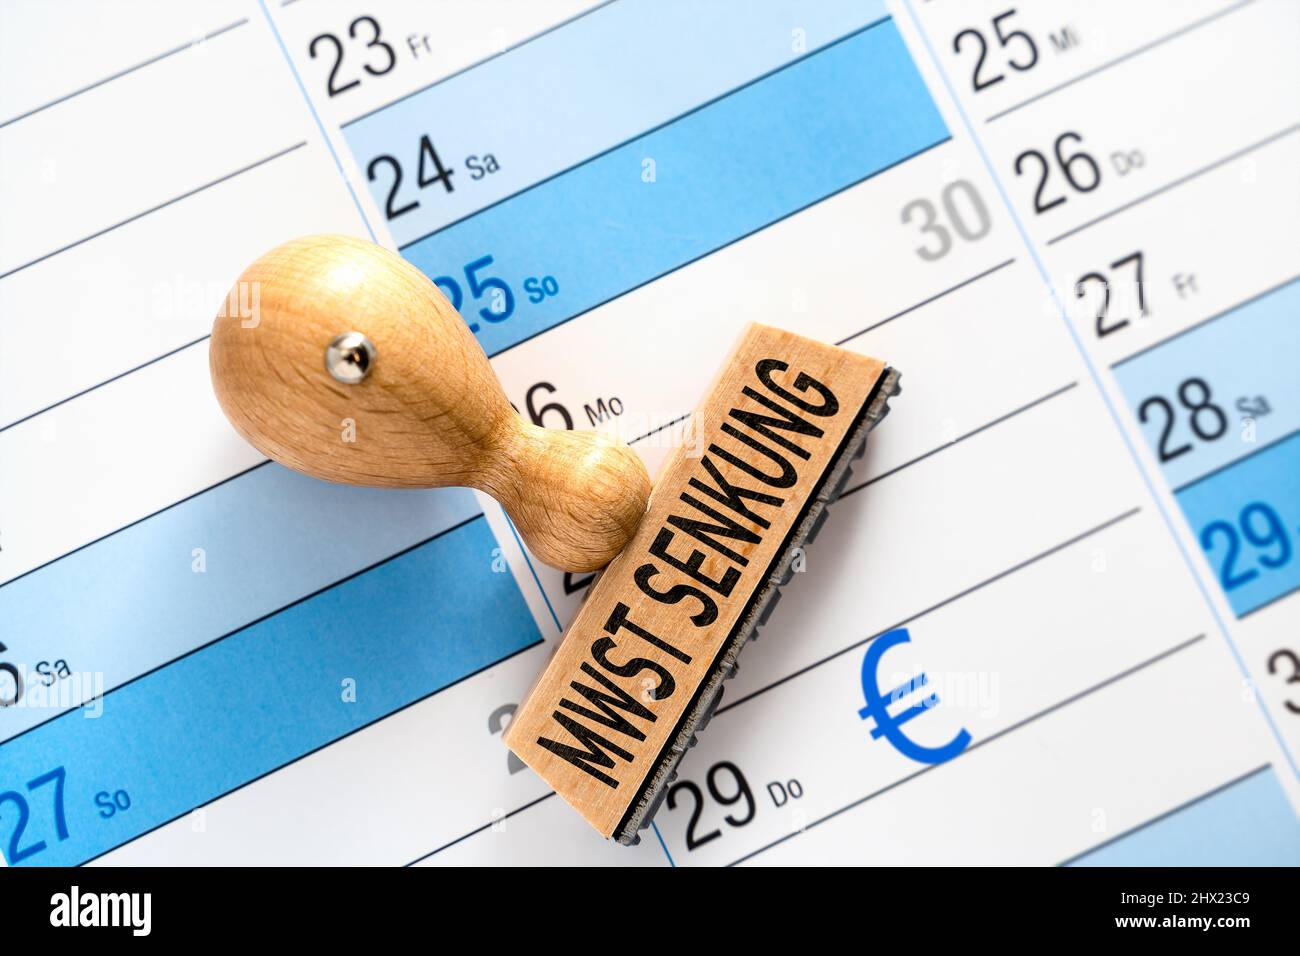 Wooden Stamp On A Calendar With The Inscription VAT Value Added Tax, Sales Tax Reduction, Adjustment Of The Tax To The Current Inflation PHOTOMONTAGE Stock Photo